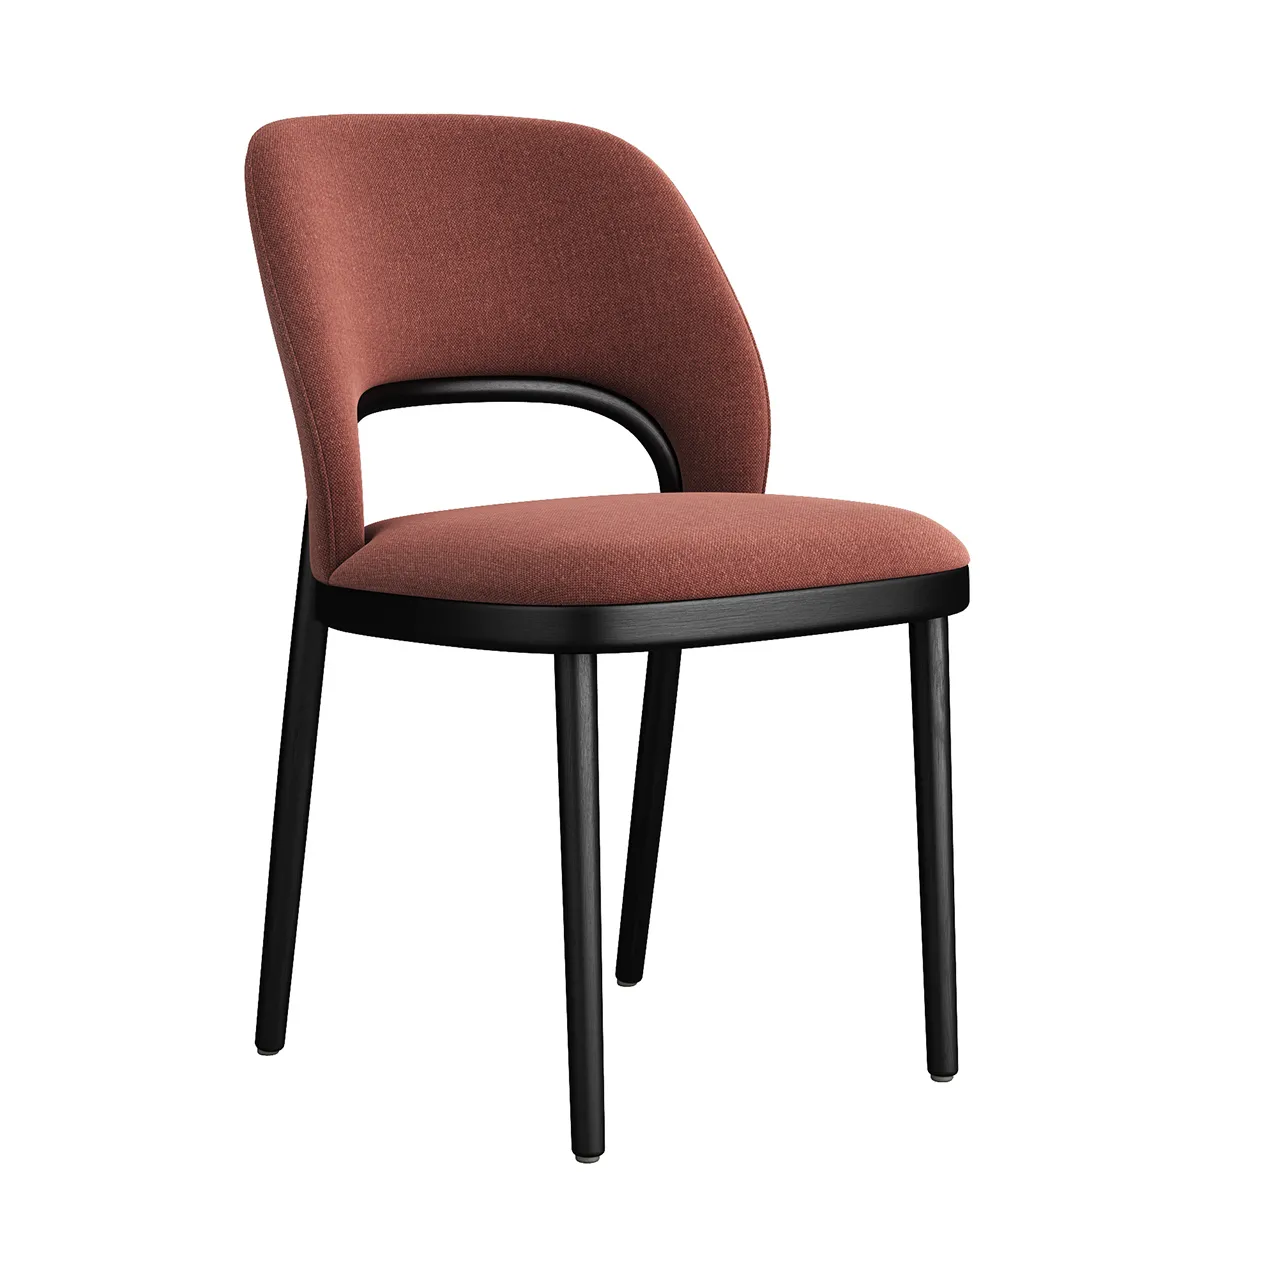 Furniture – 520-p-chair-by-thonet